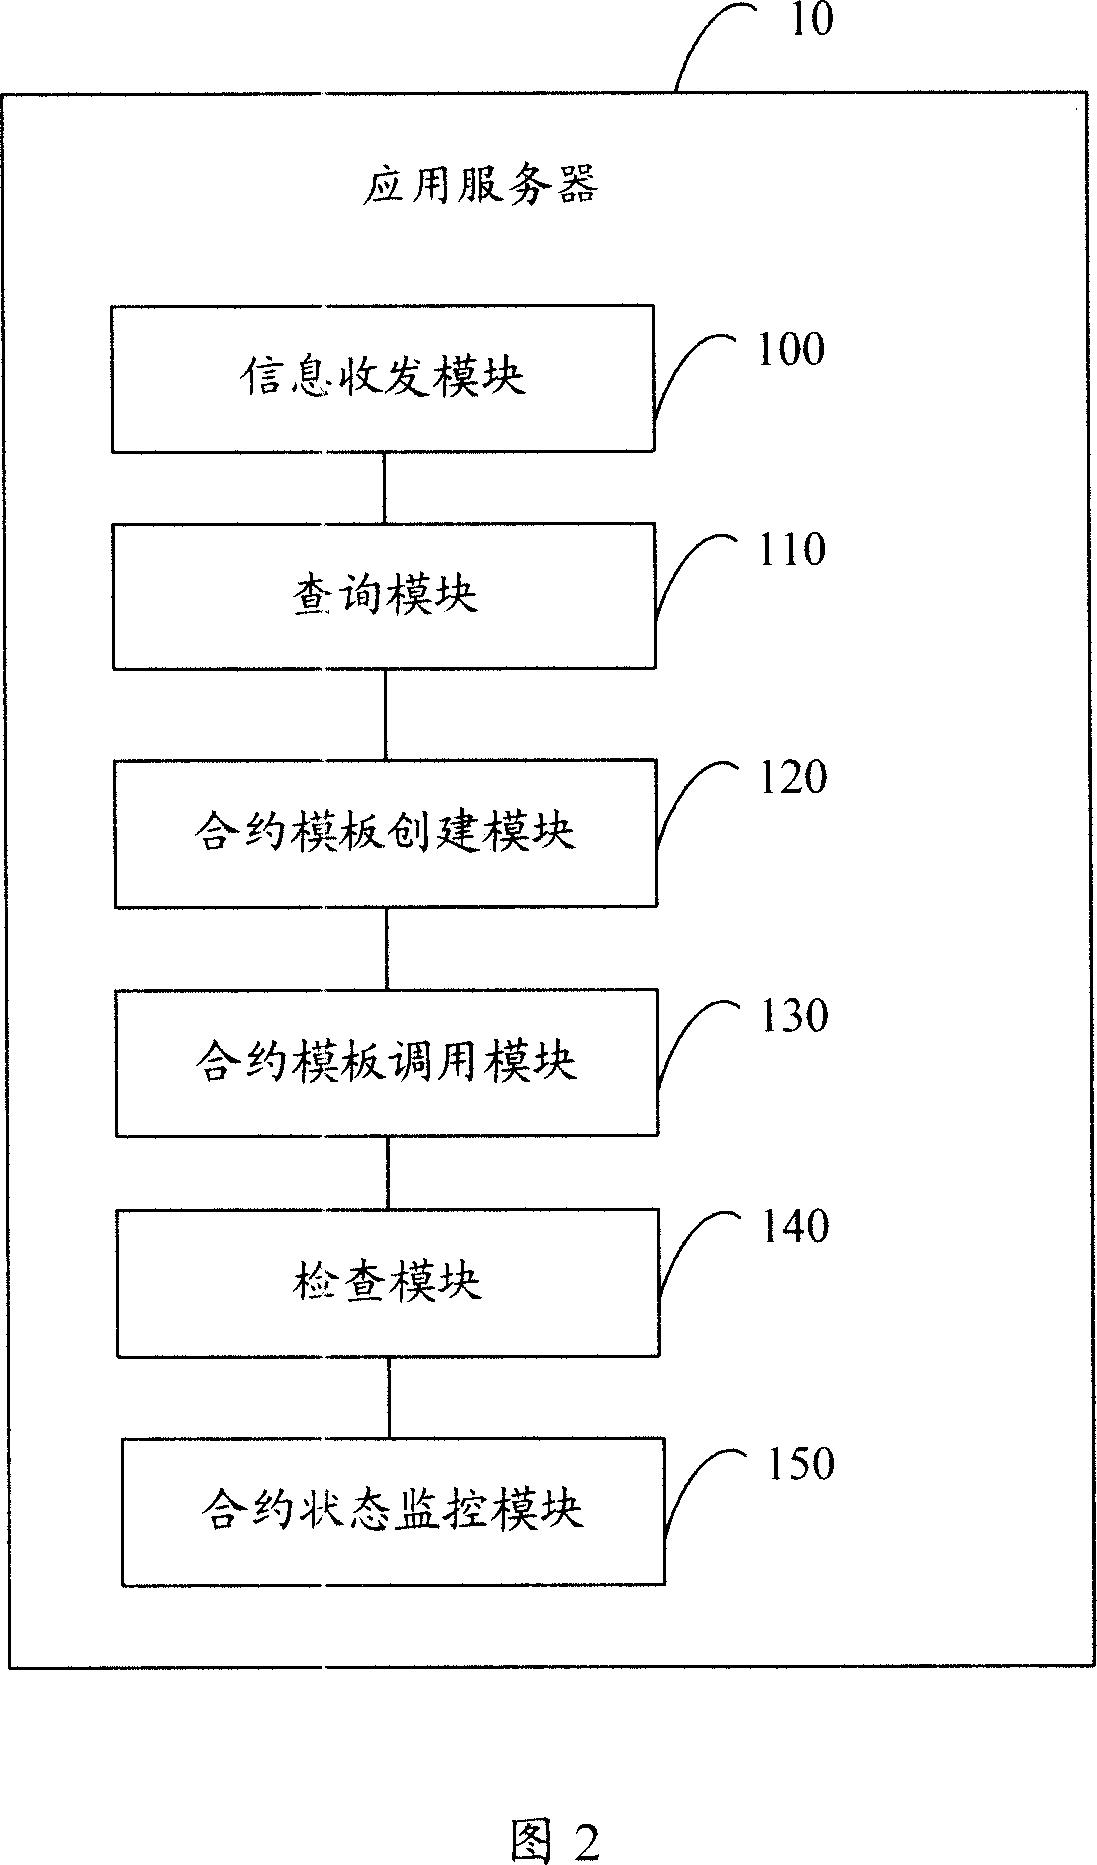 Contracted life cycle supervision system and method